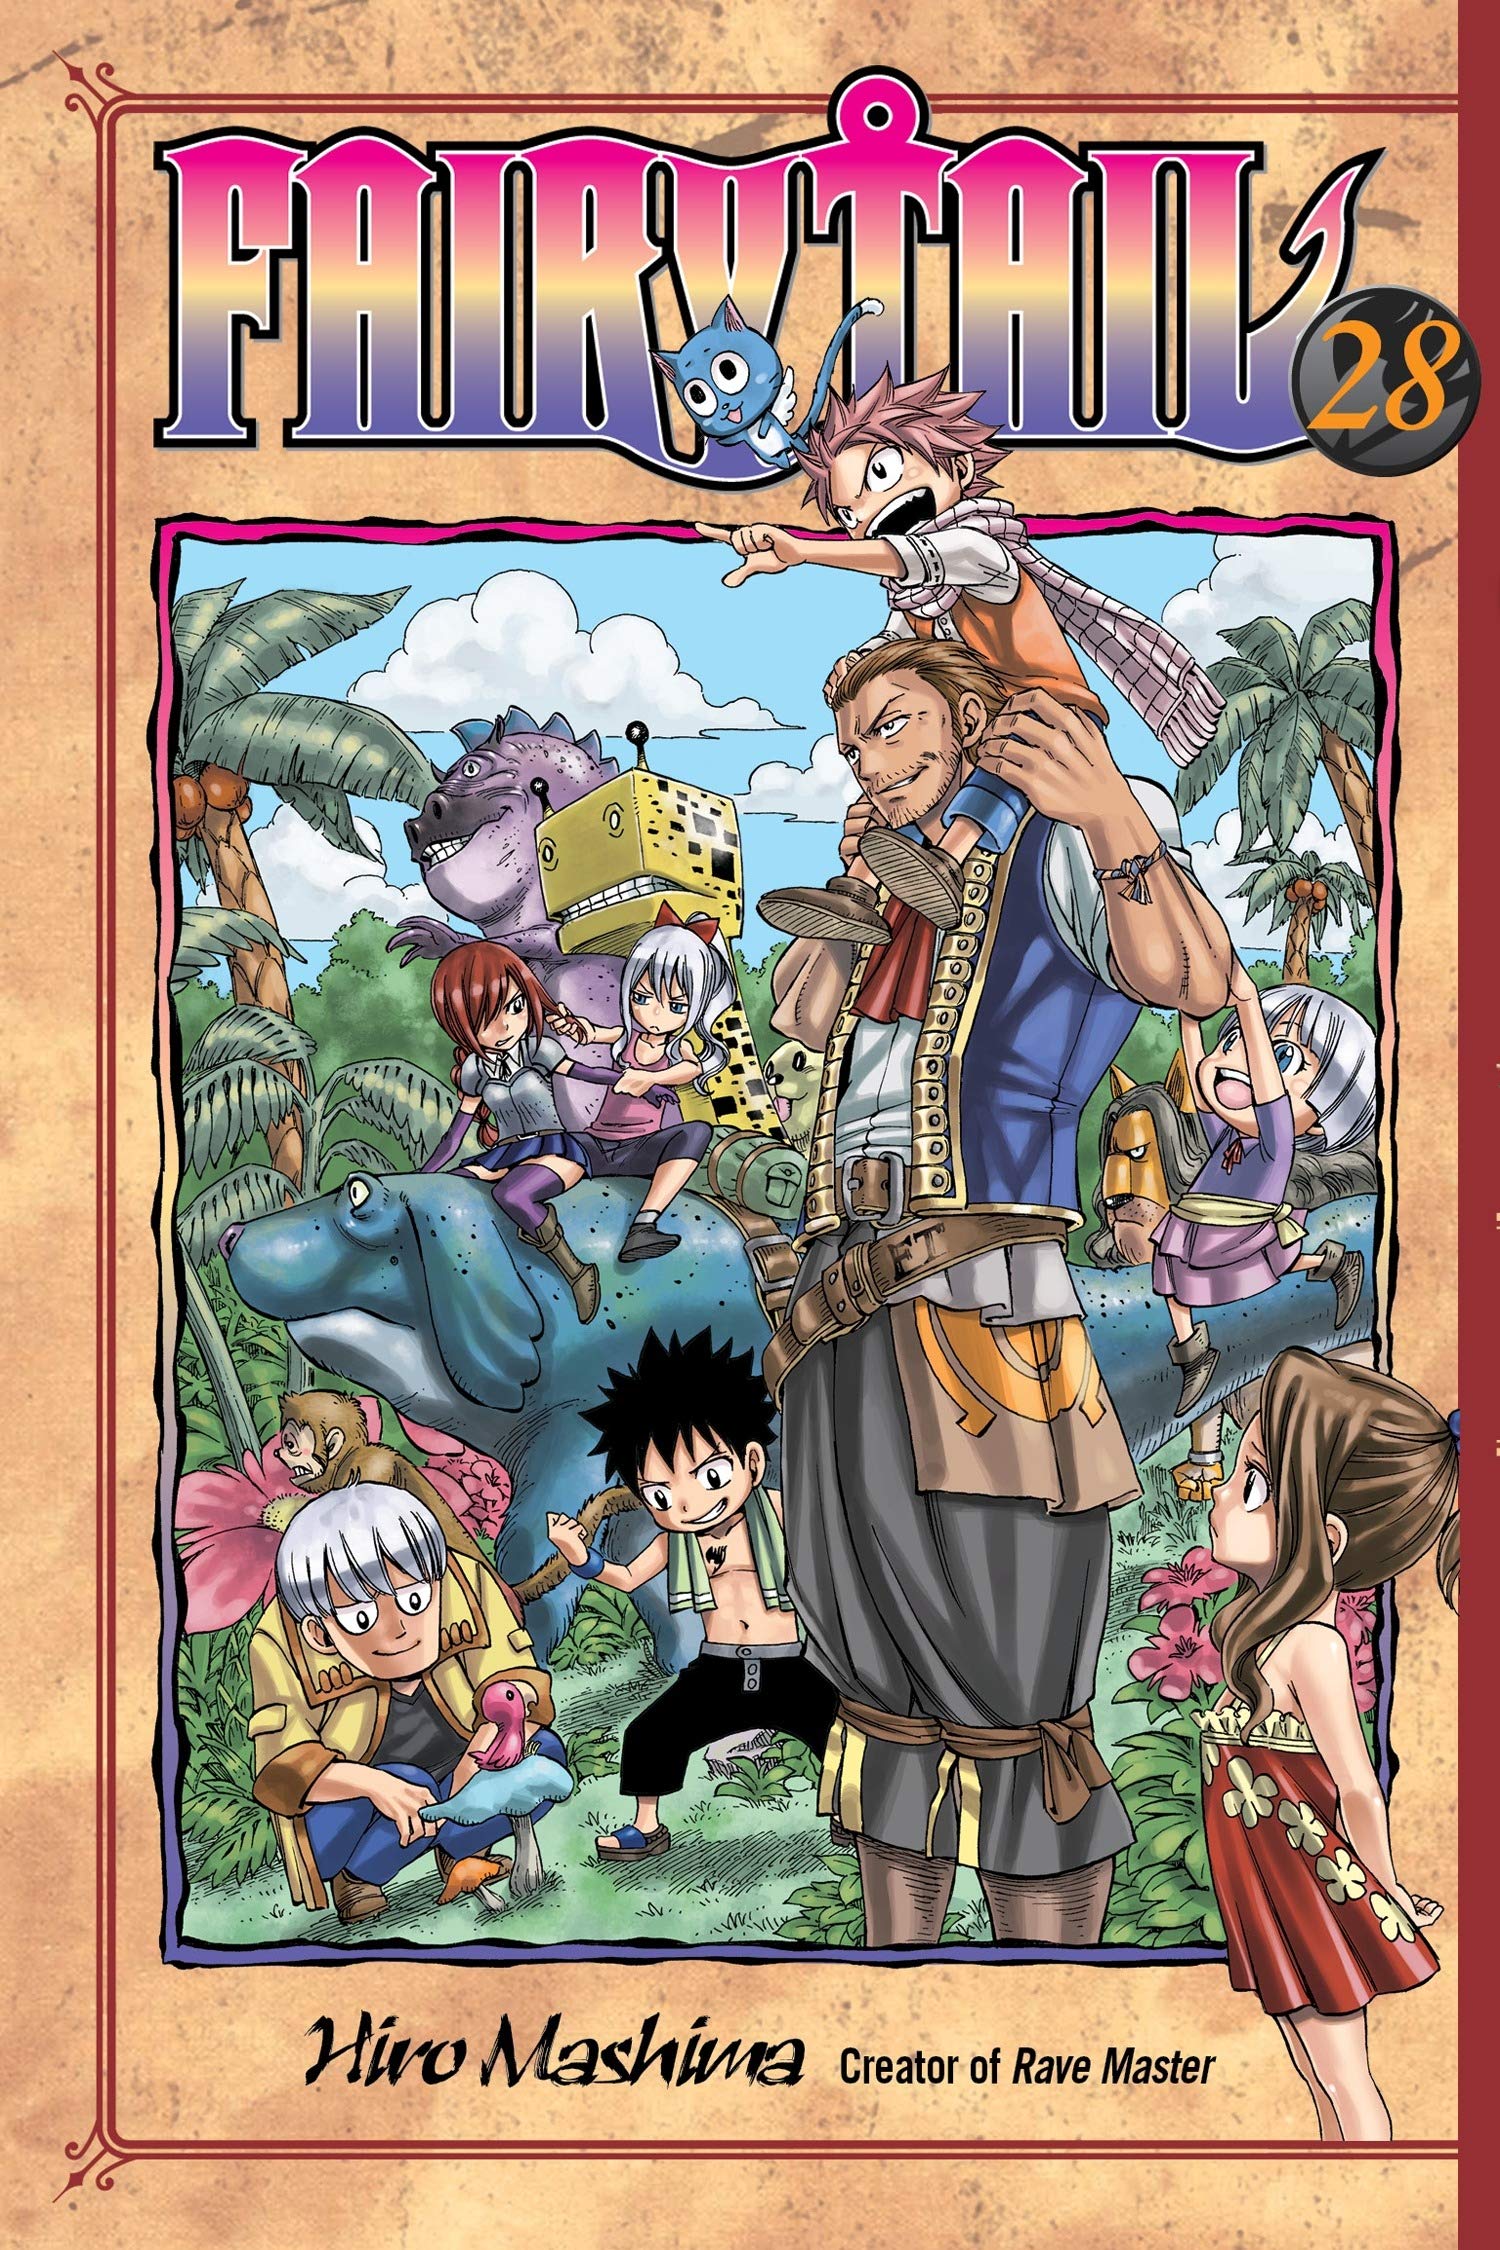 Fairy Tail and One Piece, made by the same author? - Forums